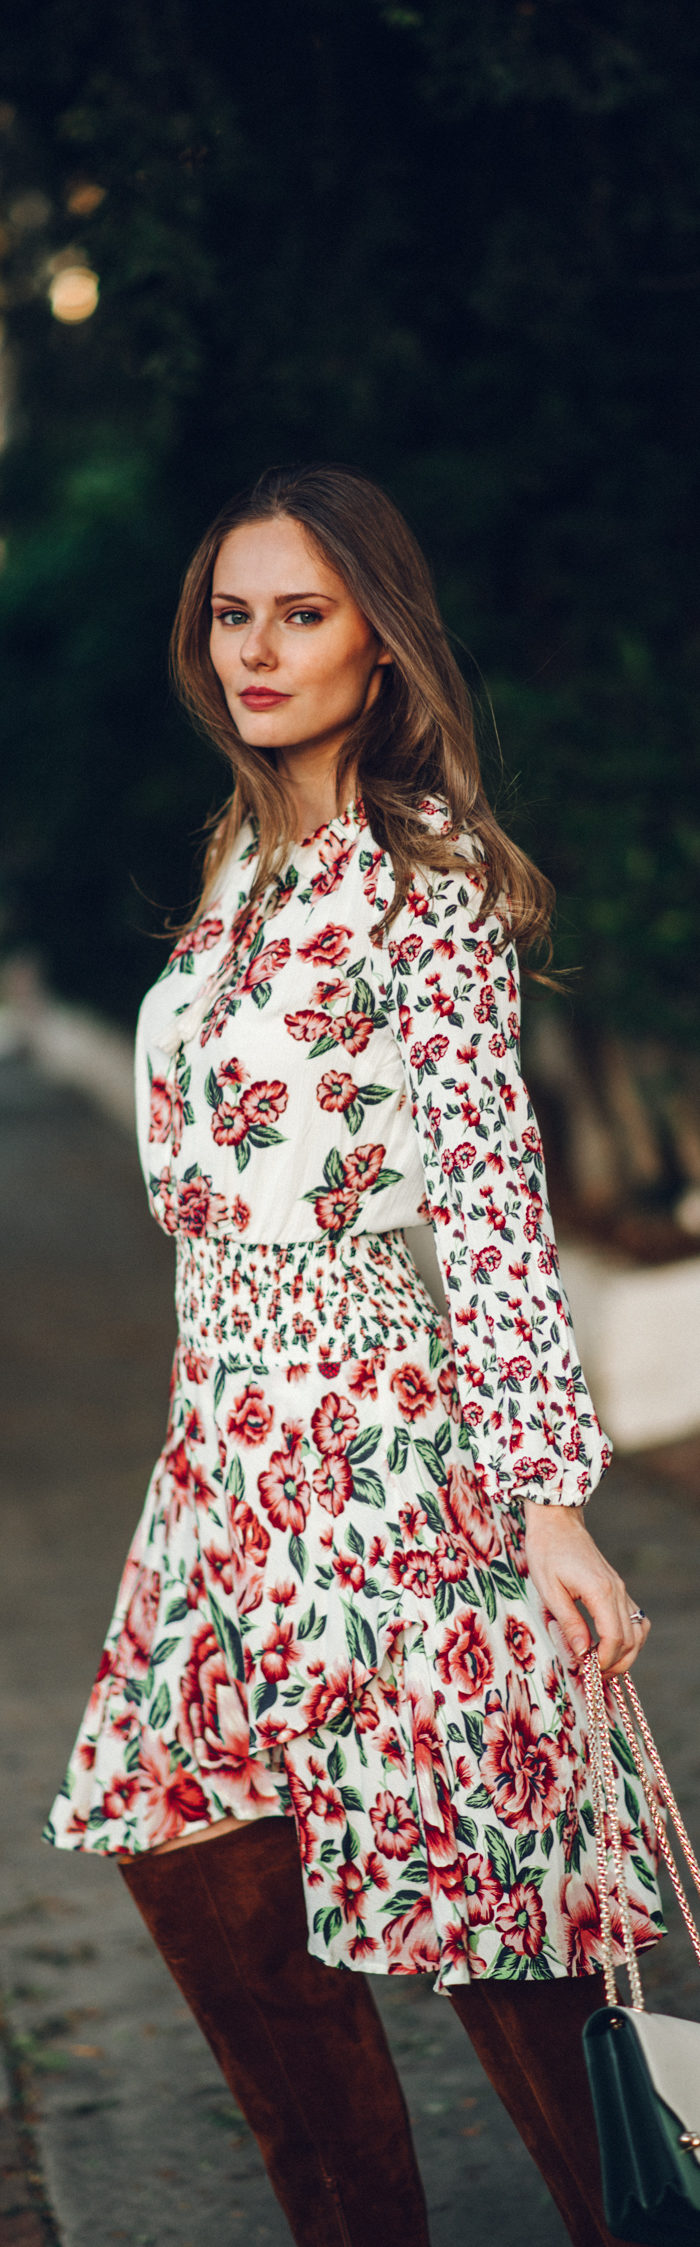 Alyssa Campanella of The A List blog shares the perfect fall floral dress wearing Farm Rio for Anthropologie